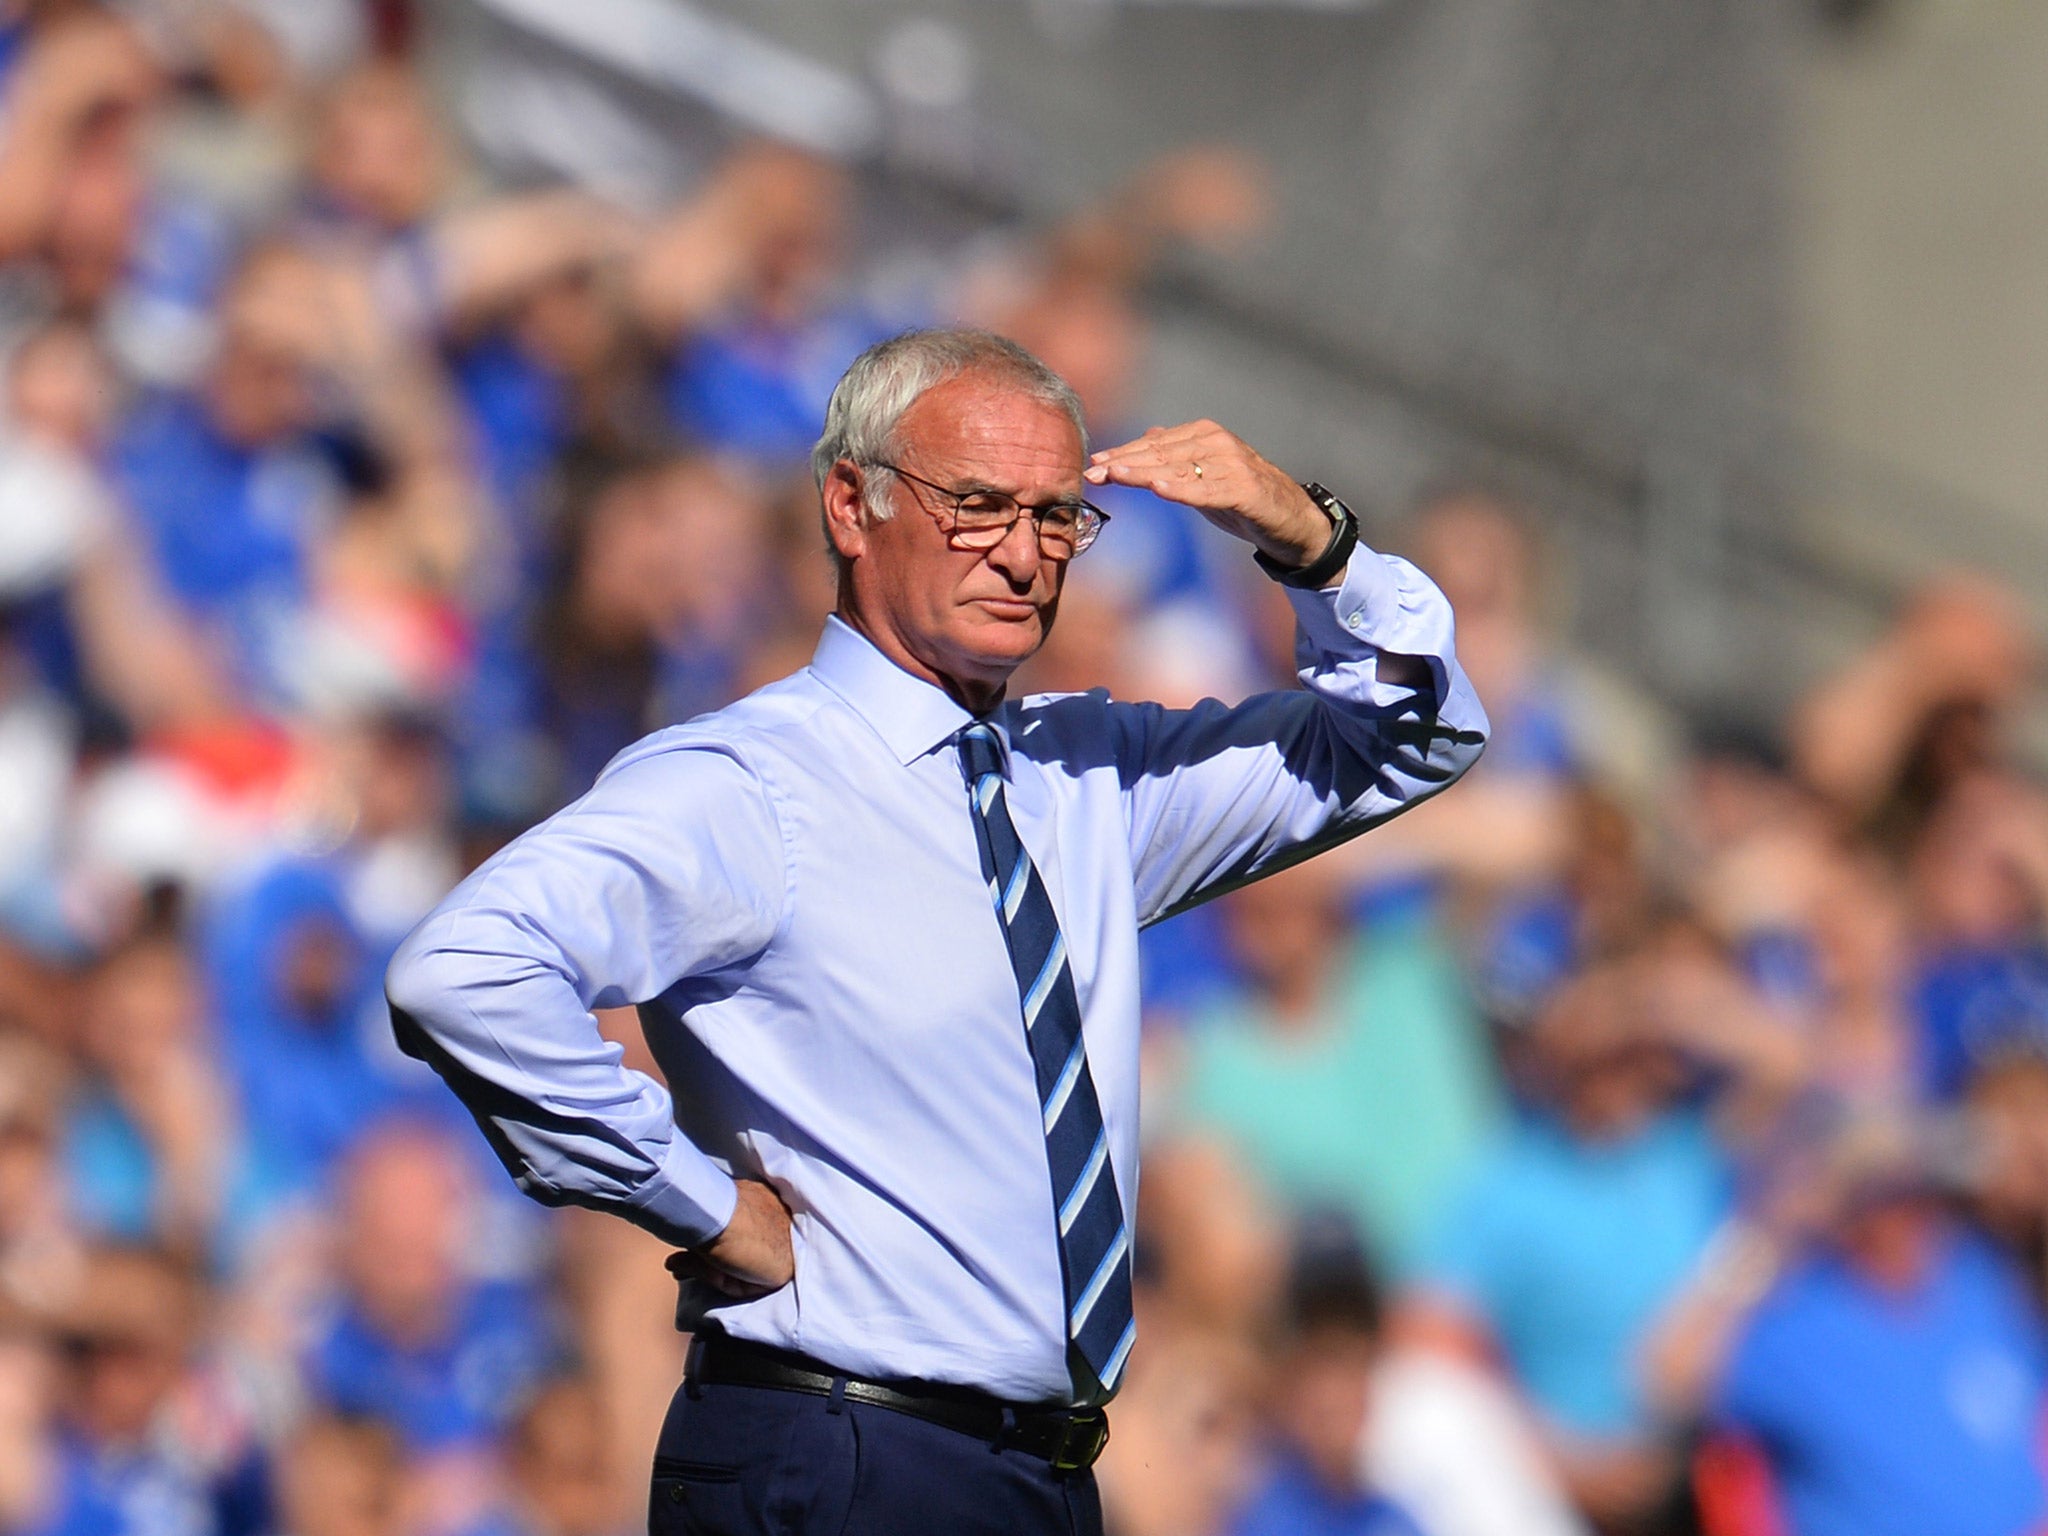 Claudio Ranieri has signed a new contract with Leicester